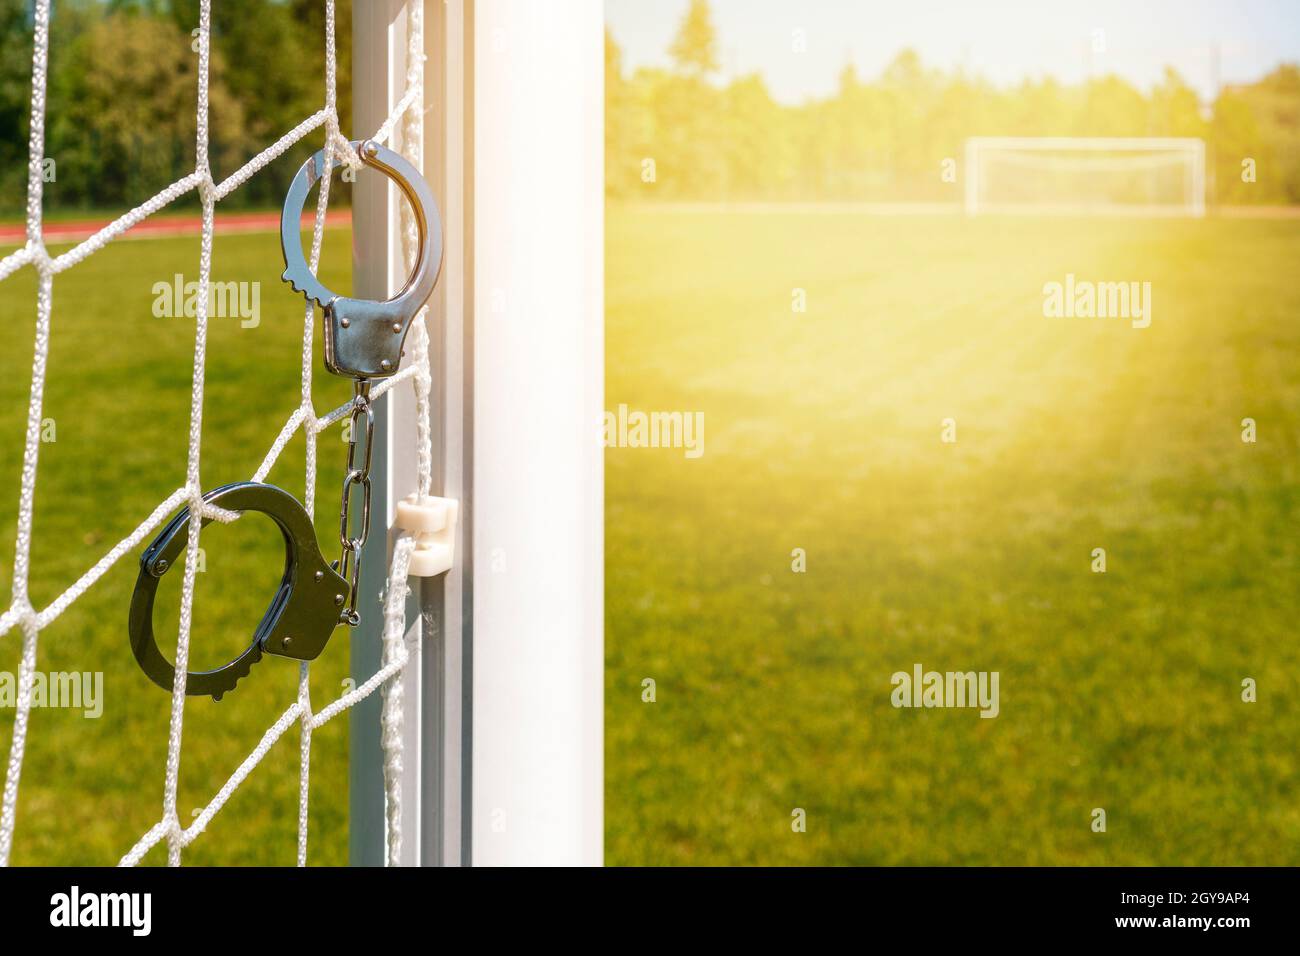 Scam with soccer or football gambling corruption. Handcuffs hanging on the football goals Stock Photo